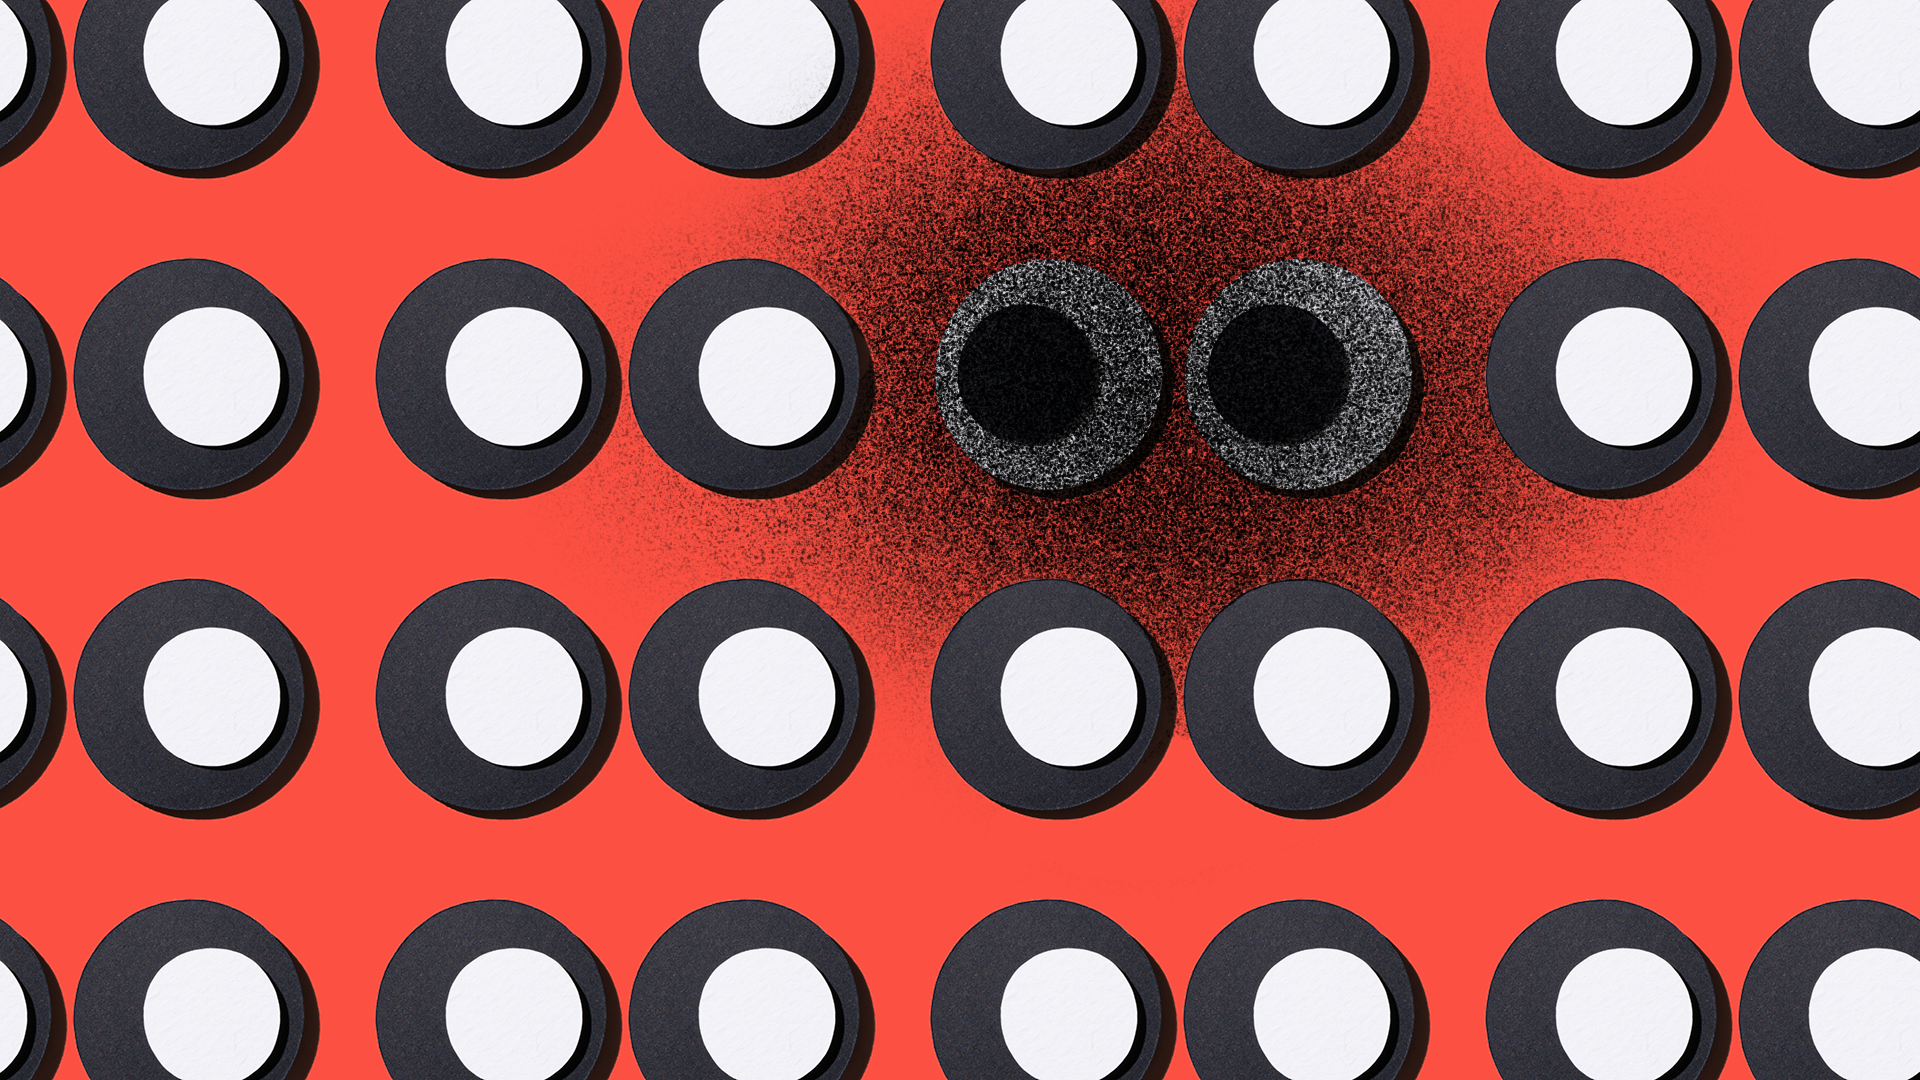 An illustration of a pair of eyes, hidden beneath a dark shadow, staring out to the left. Surrounding the eyes are white dots of the same size, against a red background.